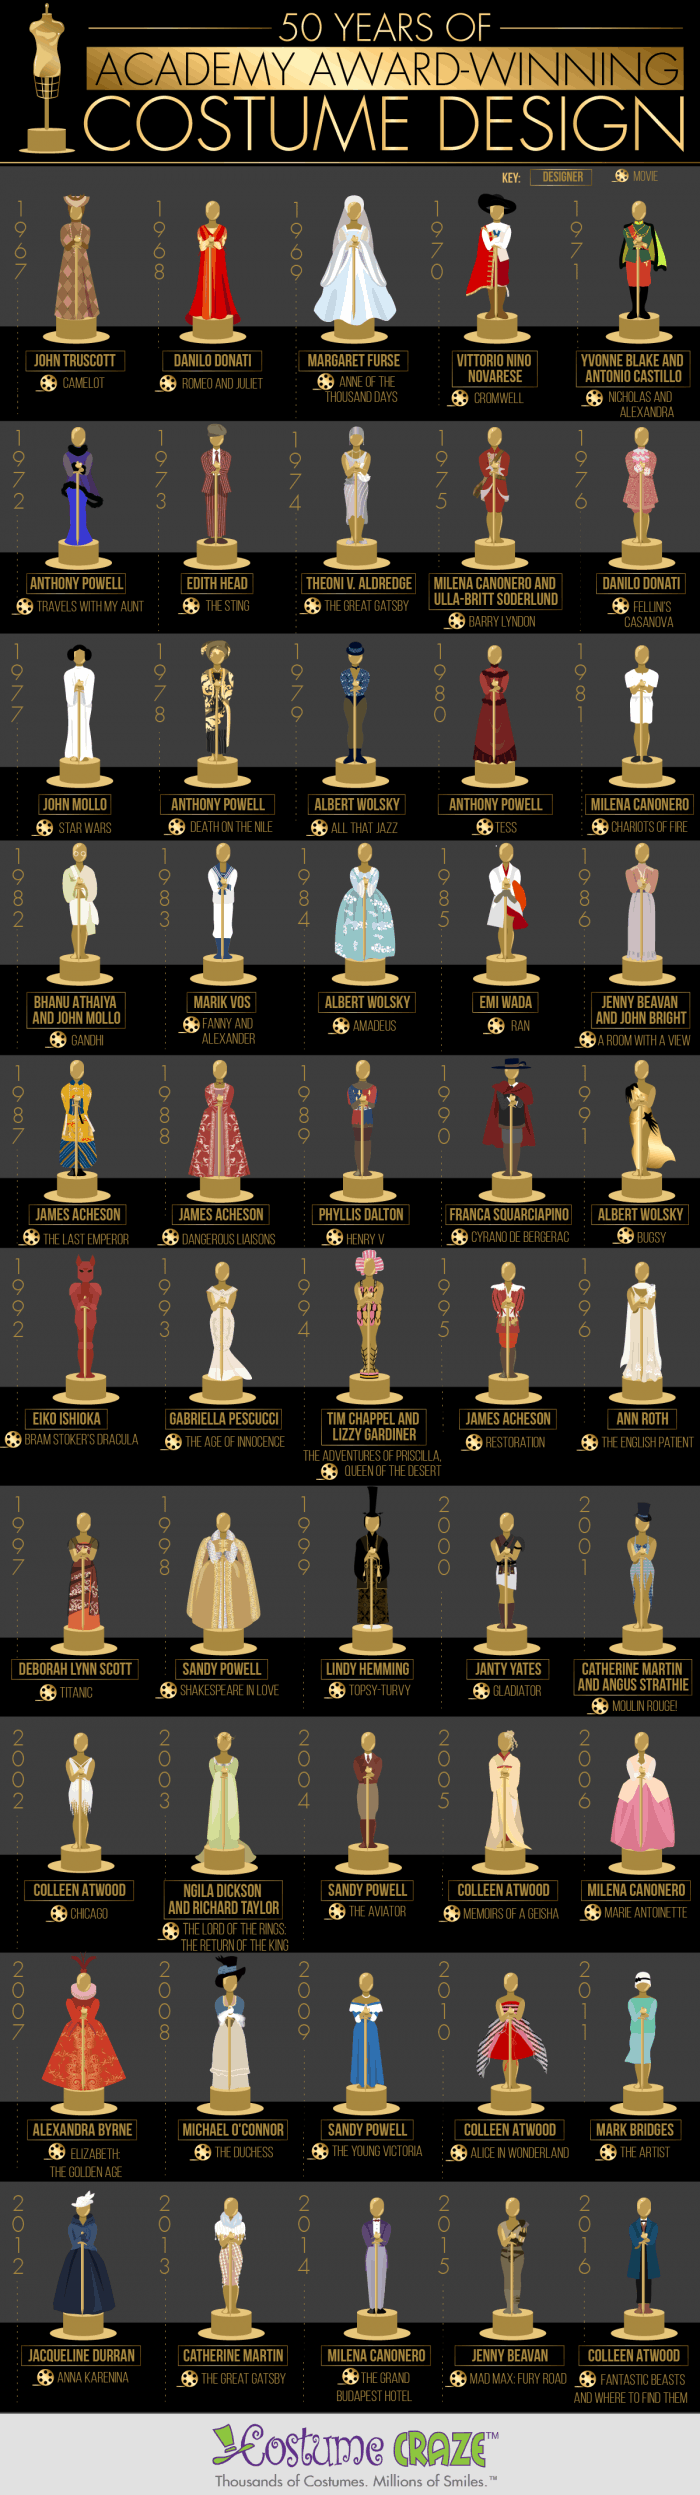 Infographic showcasing 50 years of Oscar winners in the costume design category.